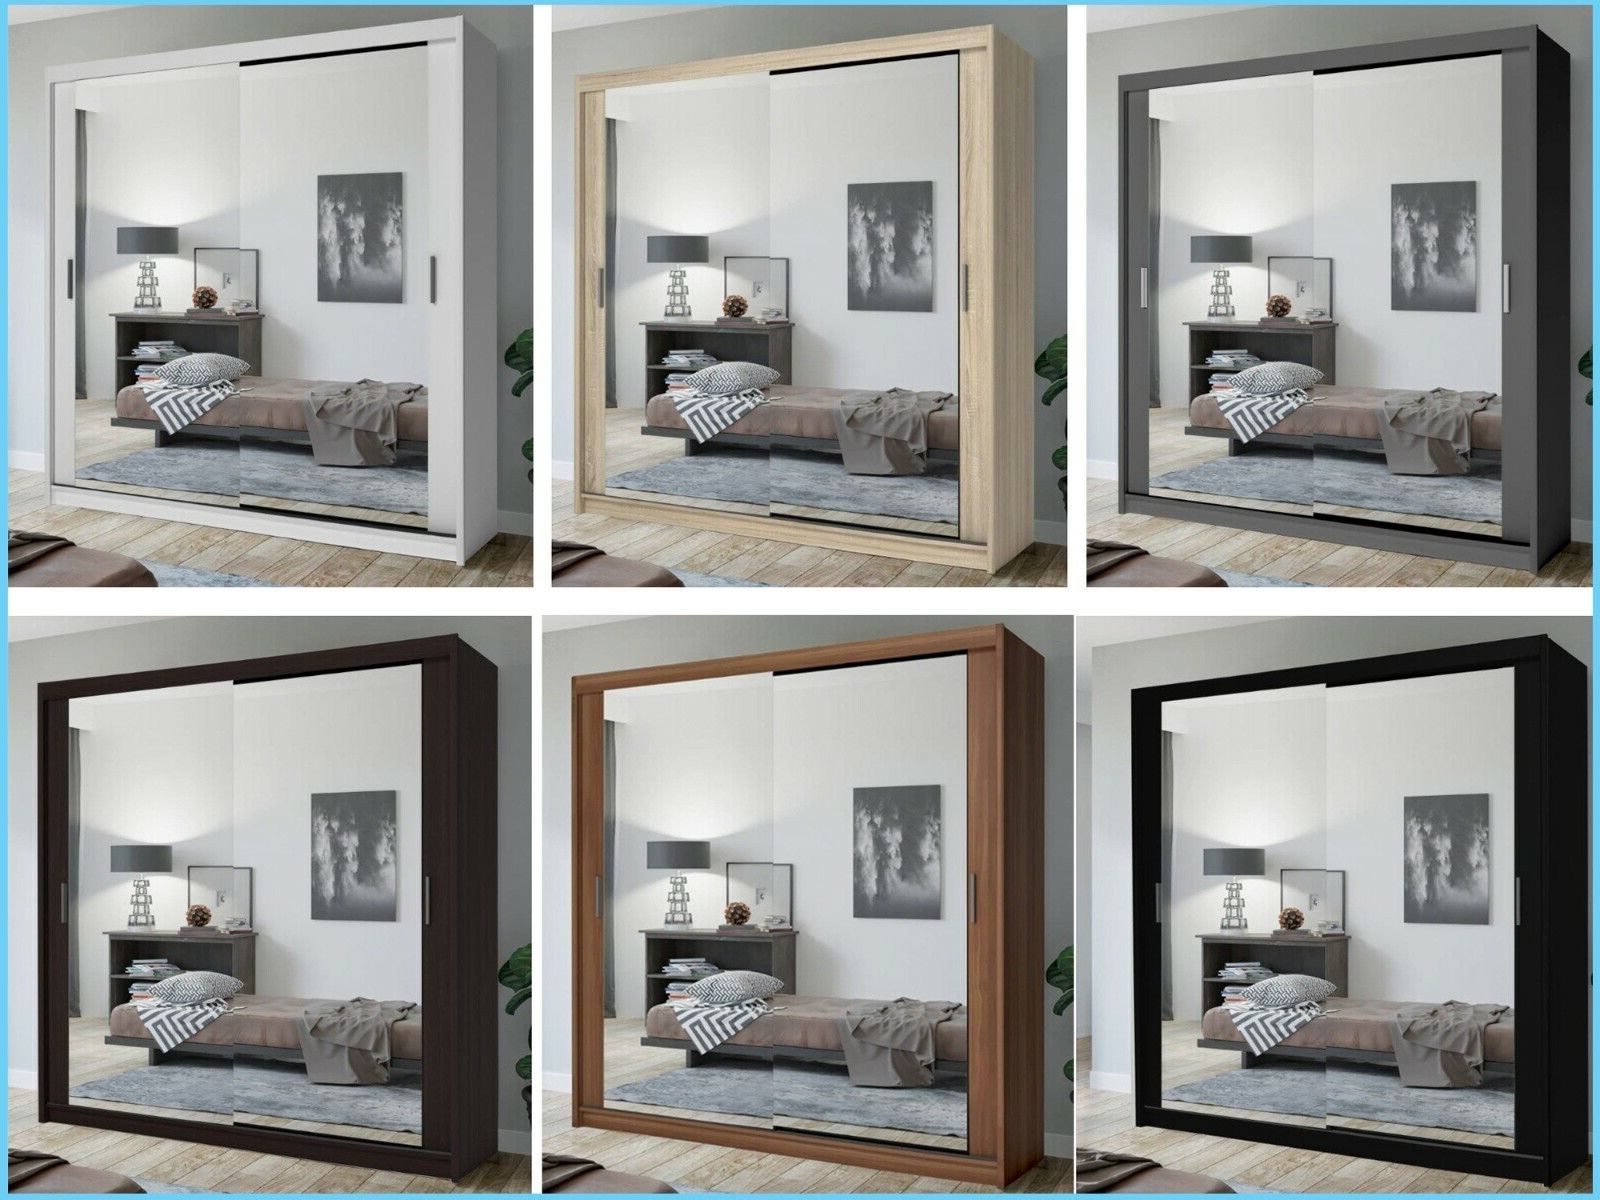 Houston Modern Double Sliding Door Wardrobe 2 Mirrored Cabinet For Bedroom  | Ebay Throughout Double Mirrored Wardrobes (View 16 of 20)